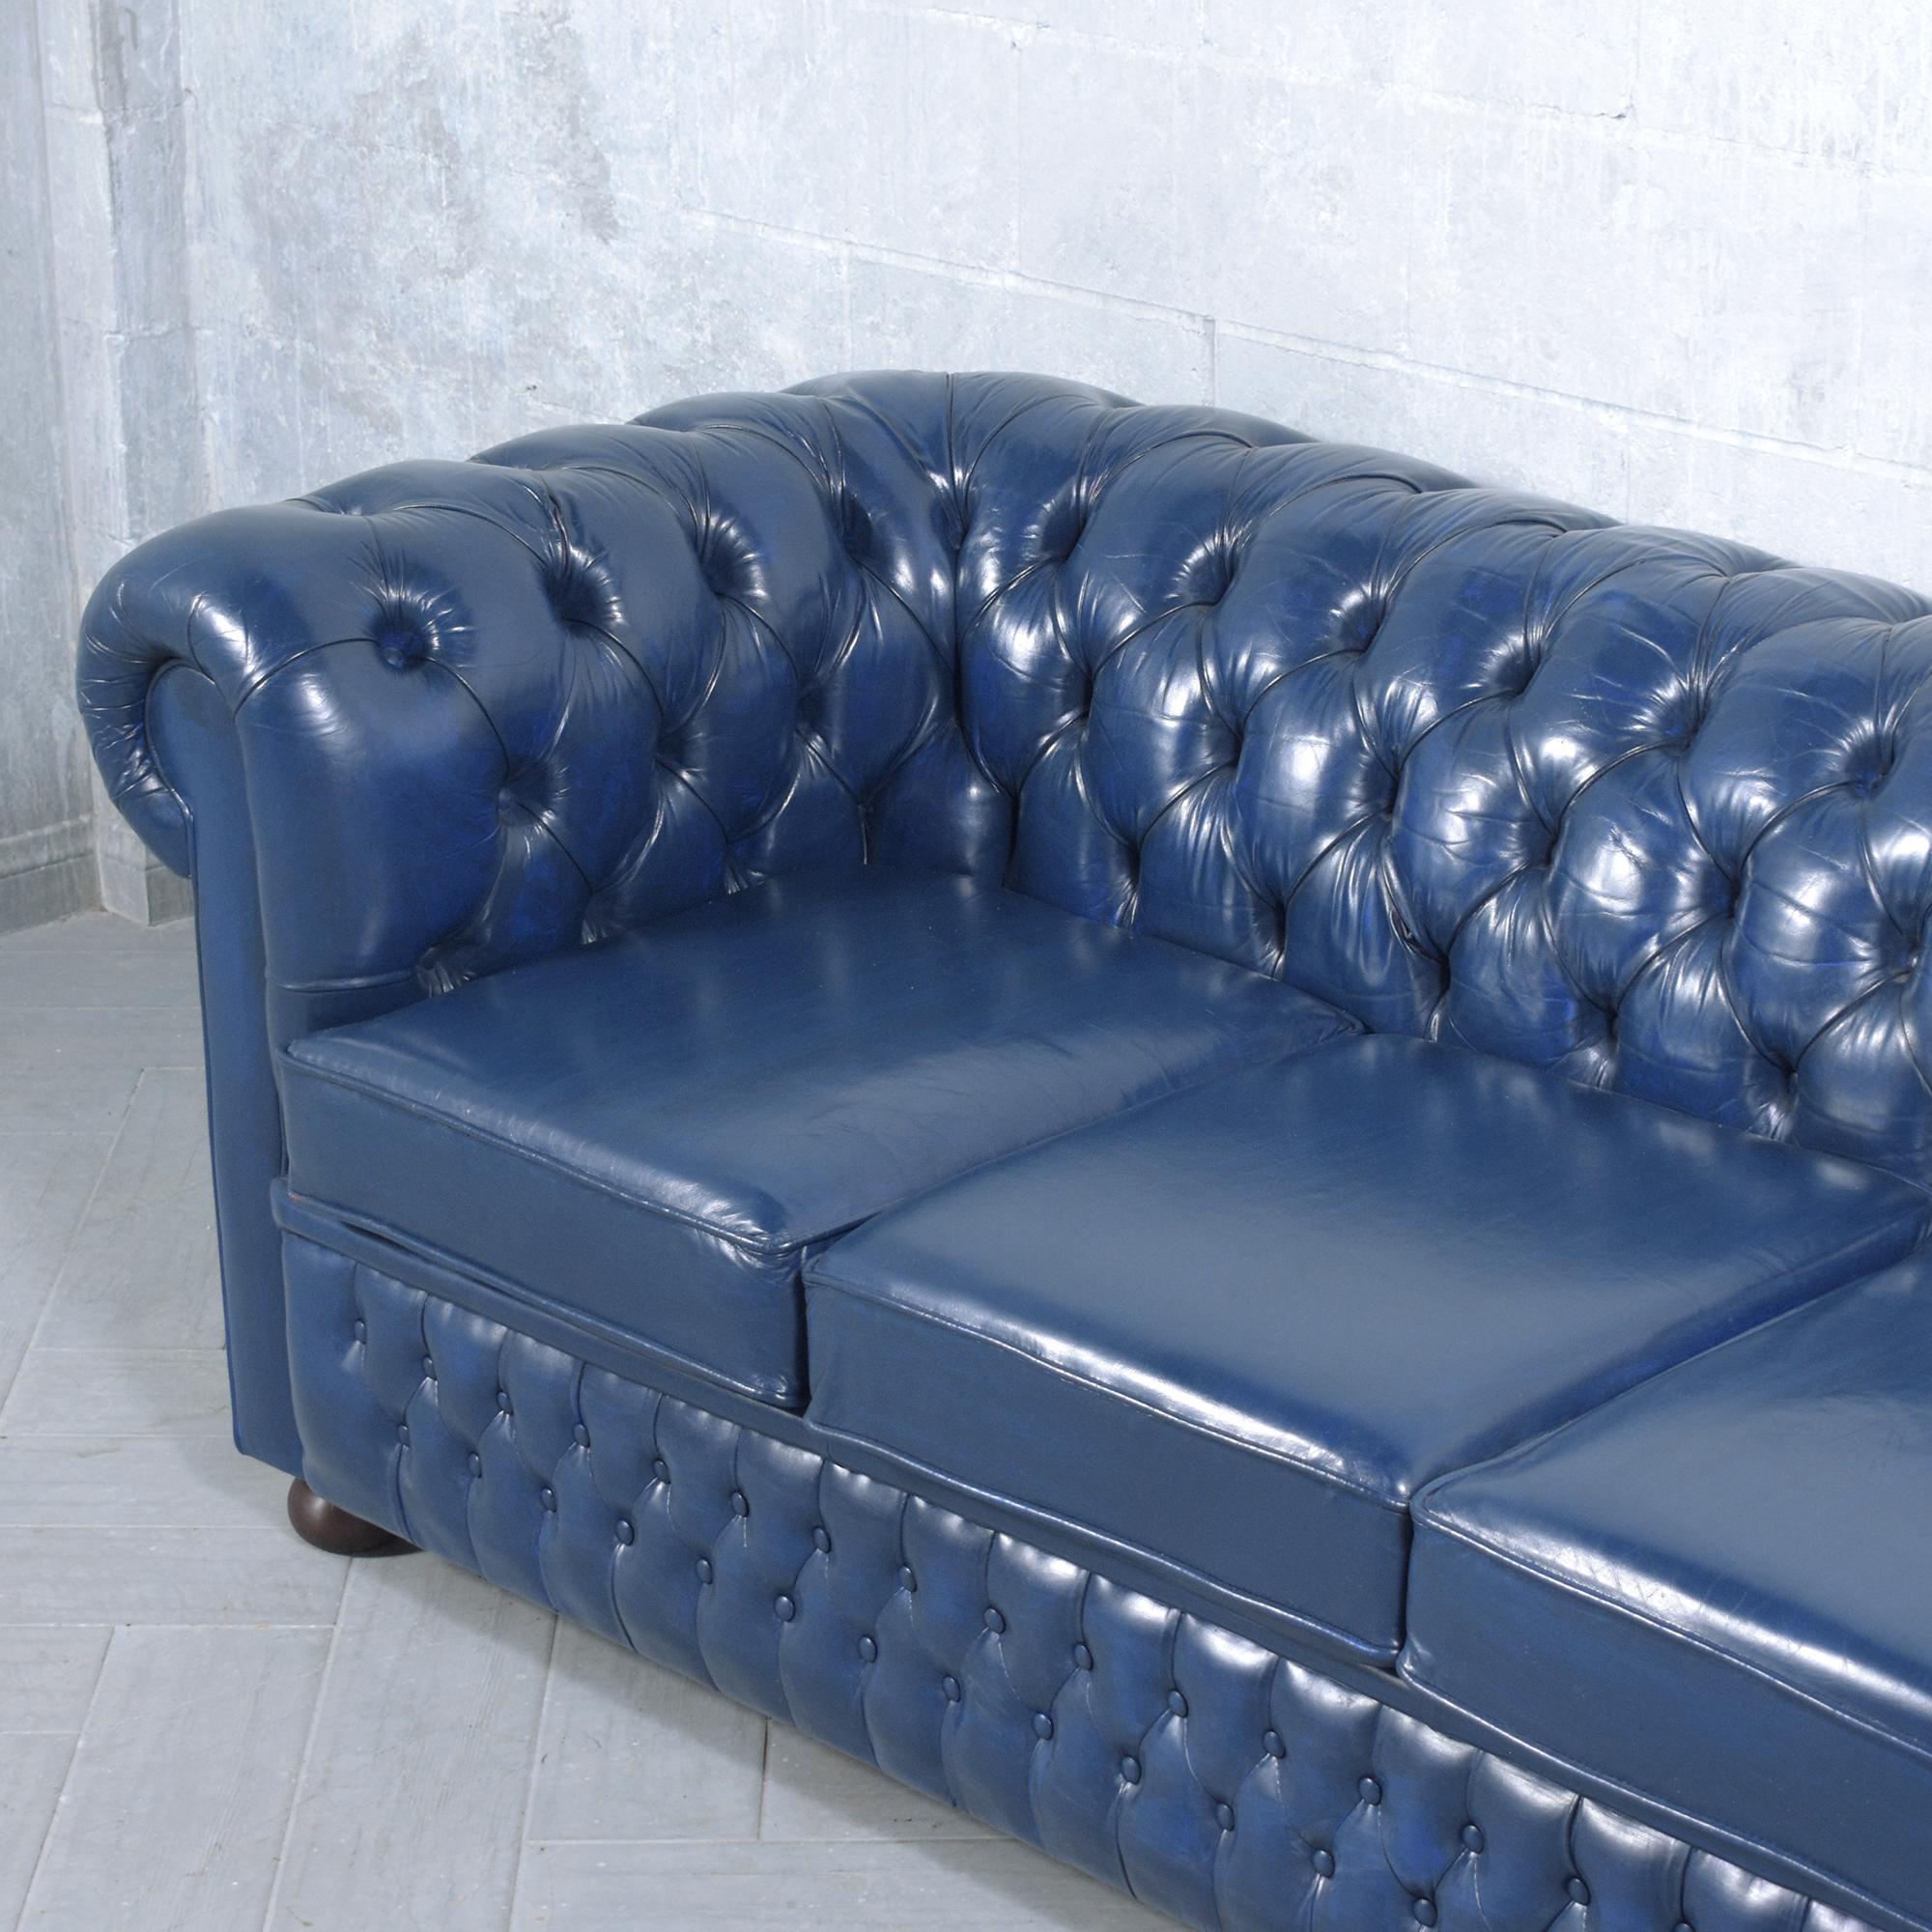 Dyed Restored Vintage Chesterfield Sofa in Distressed Navy Leather